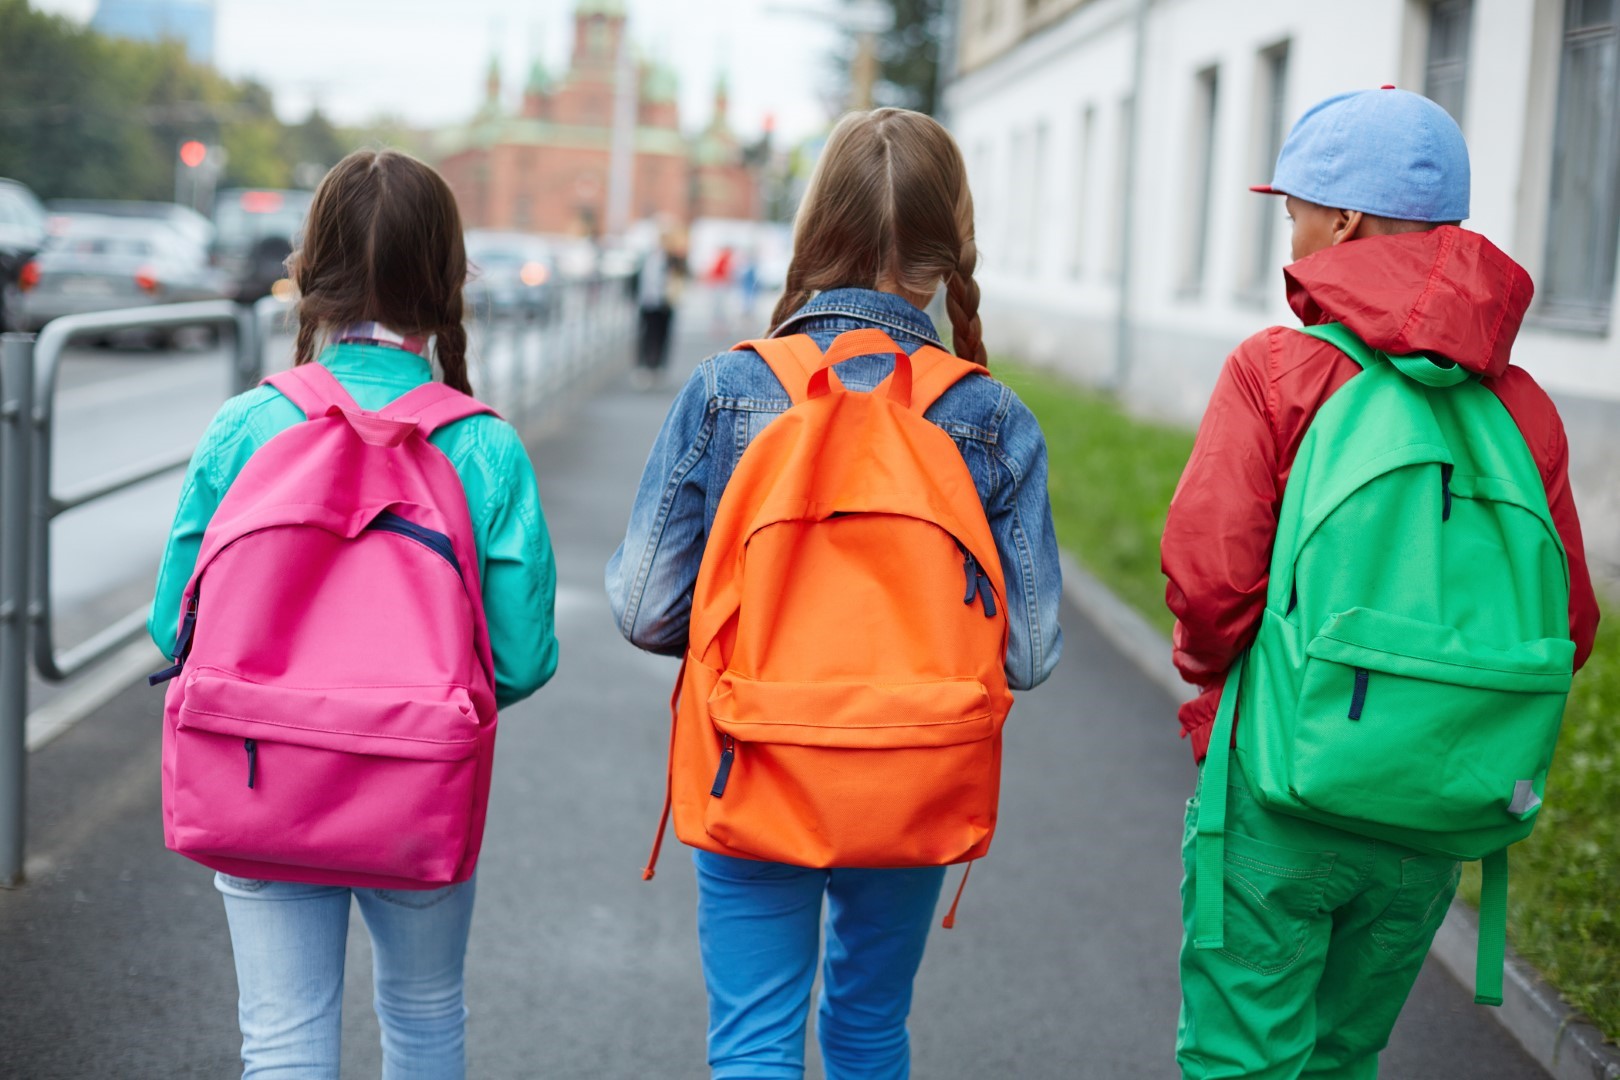 Three children walking carrying brightly colored backpacks